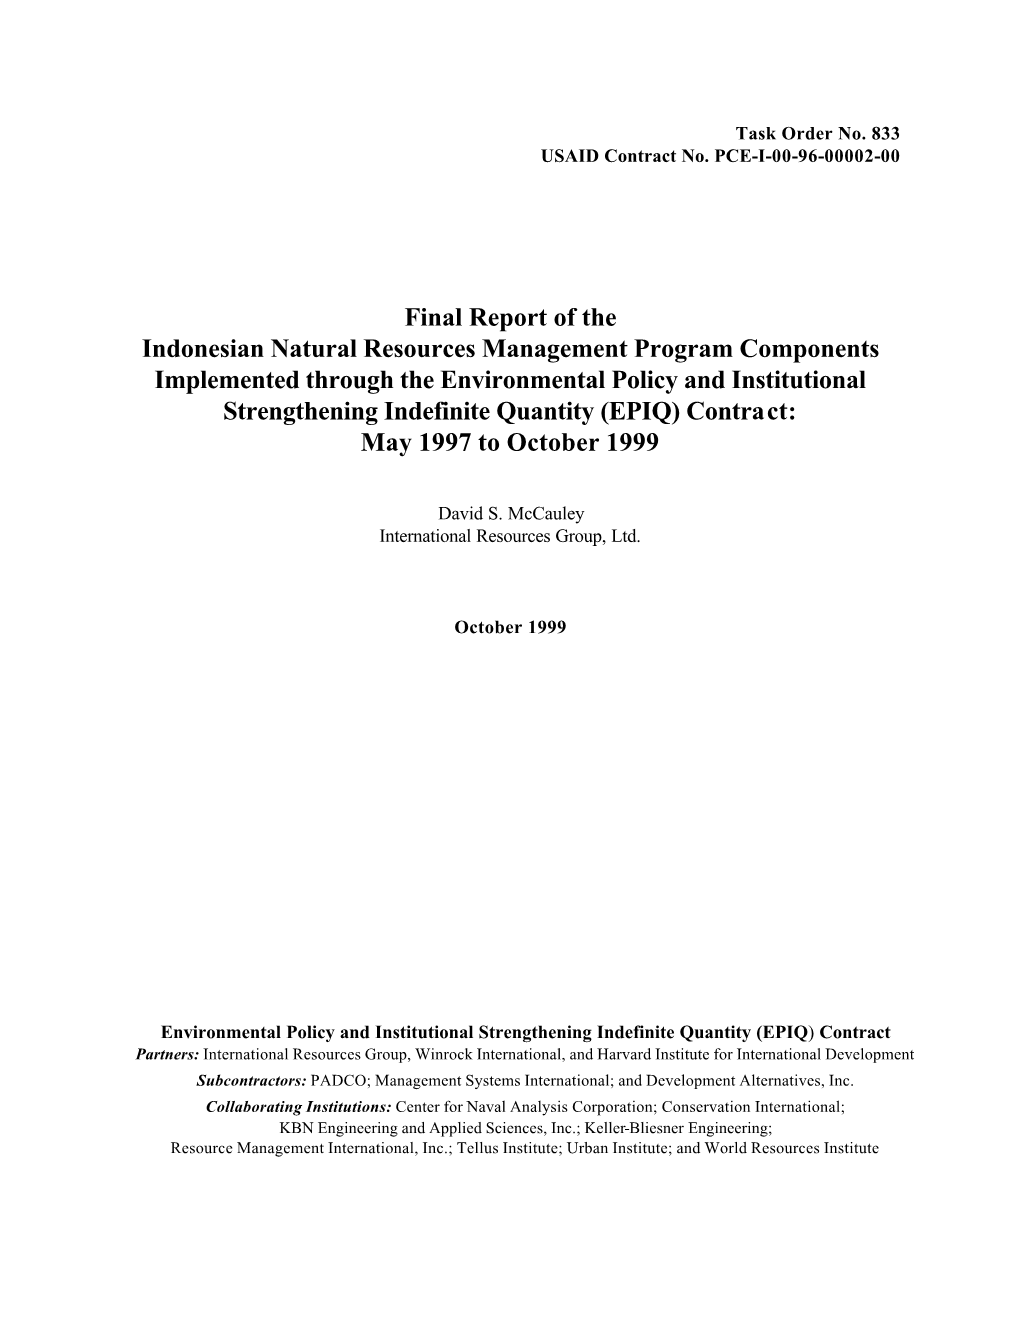 Final Report of the Indonesian Natural Resources Management Program